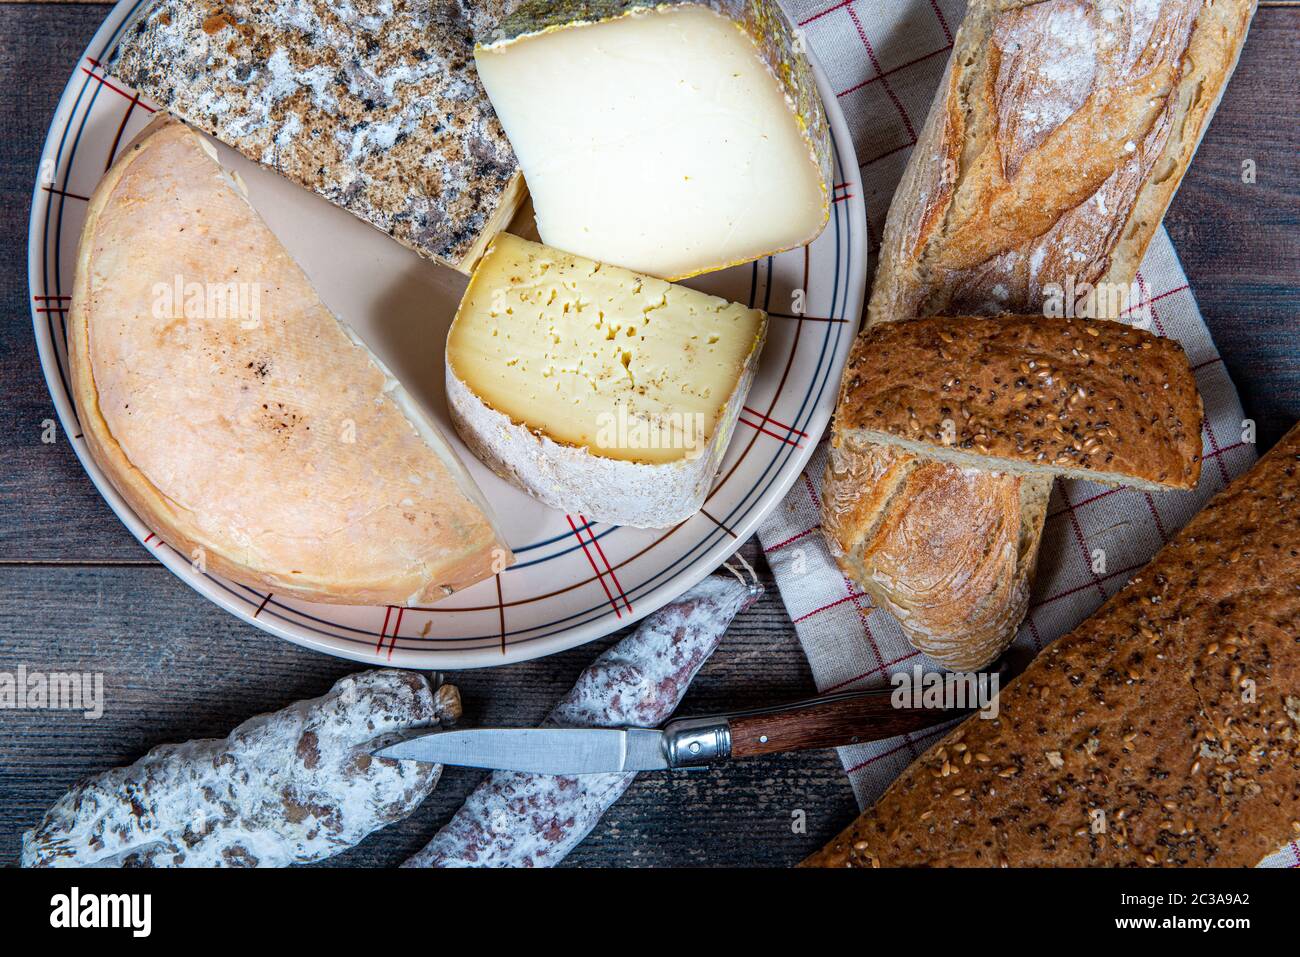 cheeses, sausage and Tomme de Savoie, Savoy, a french Alps France. Stock Photo